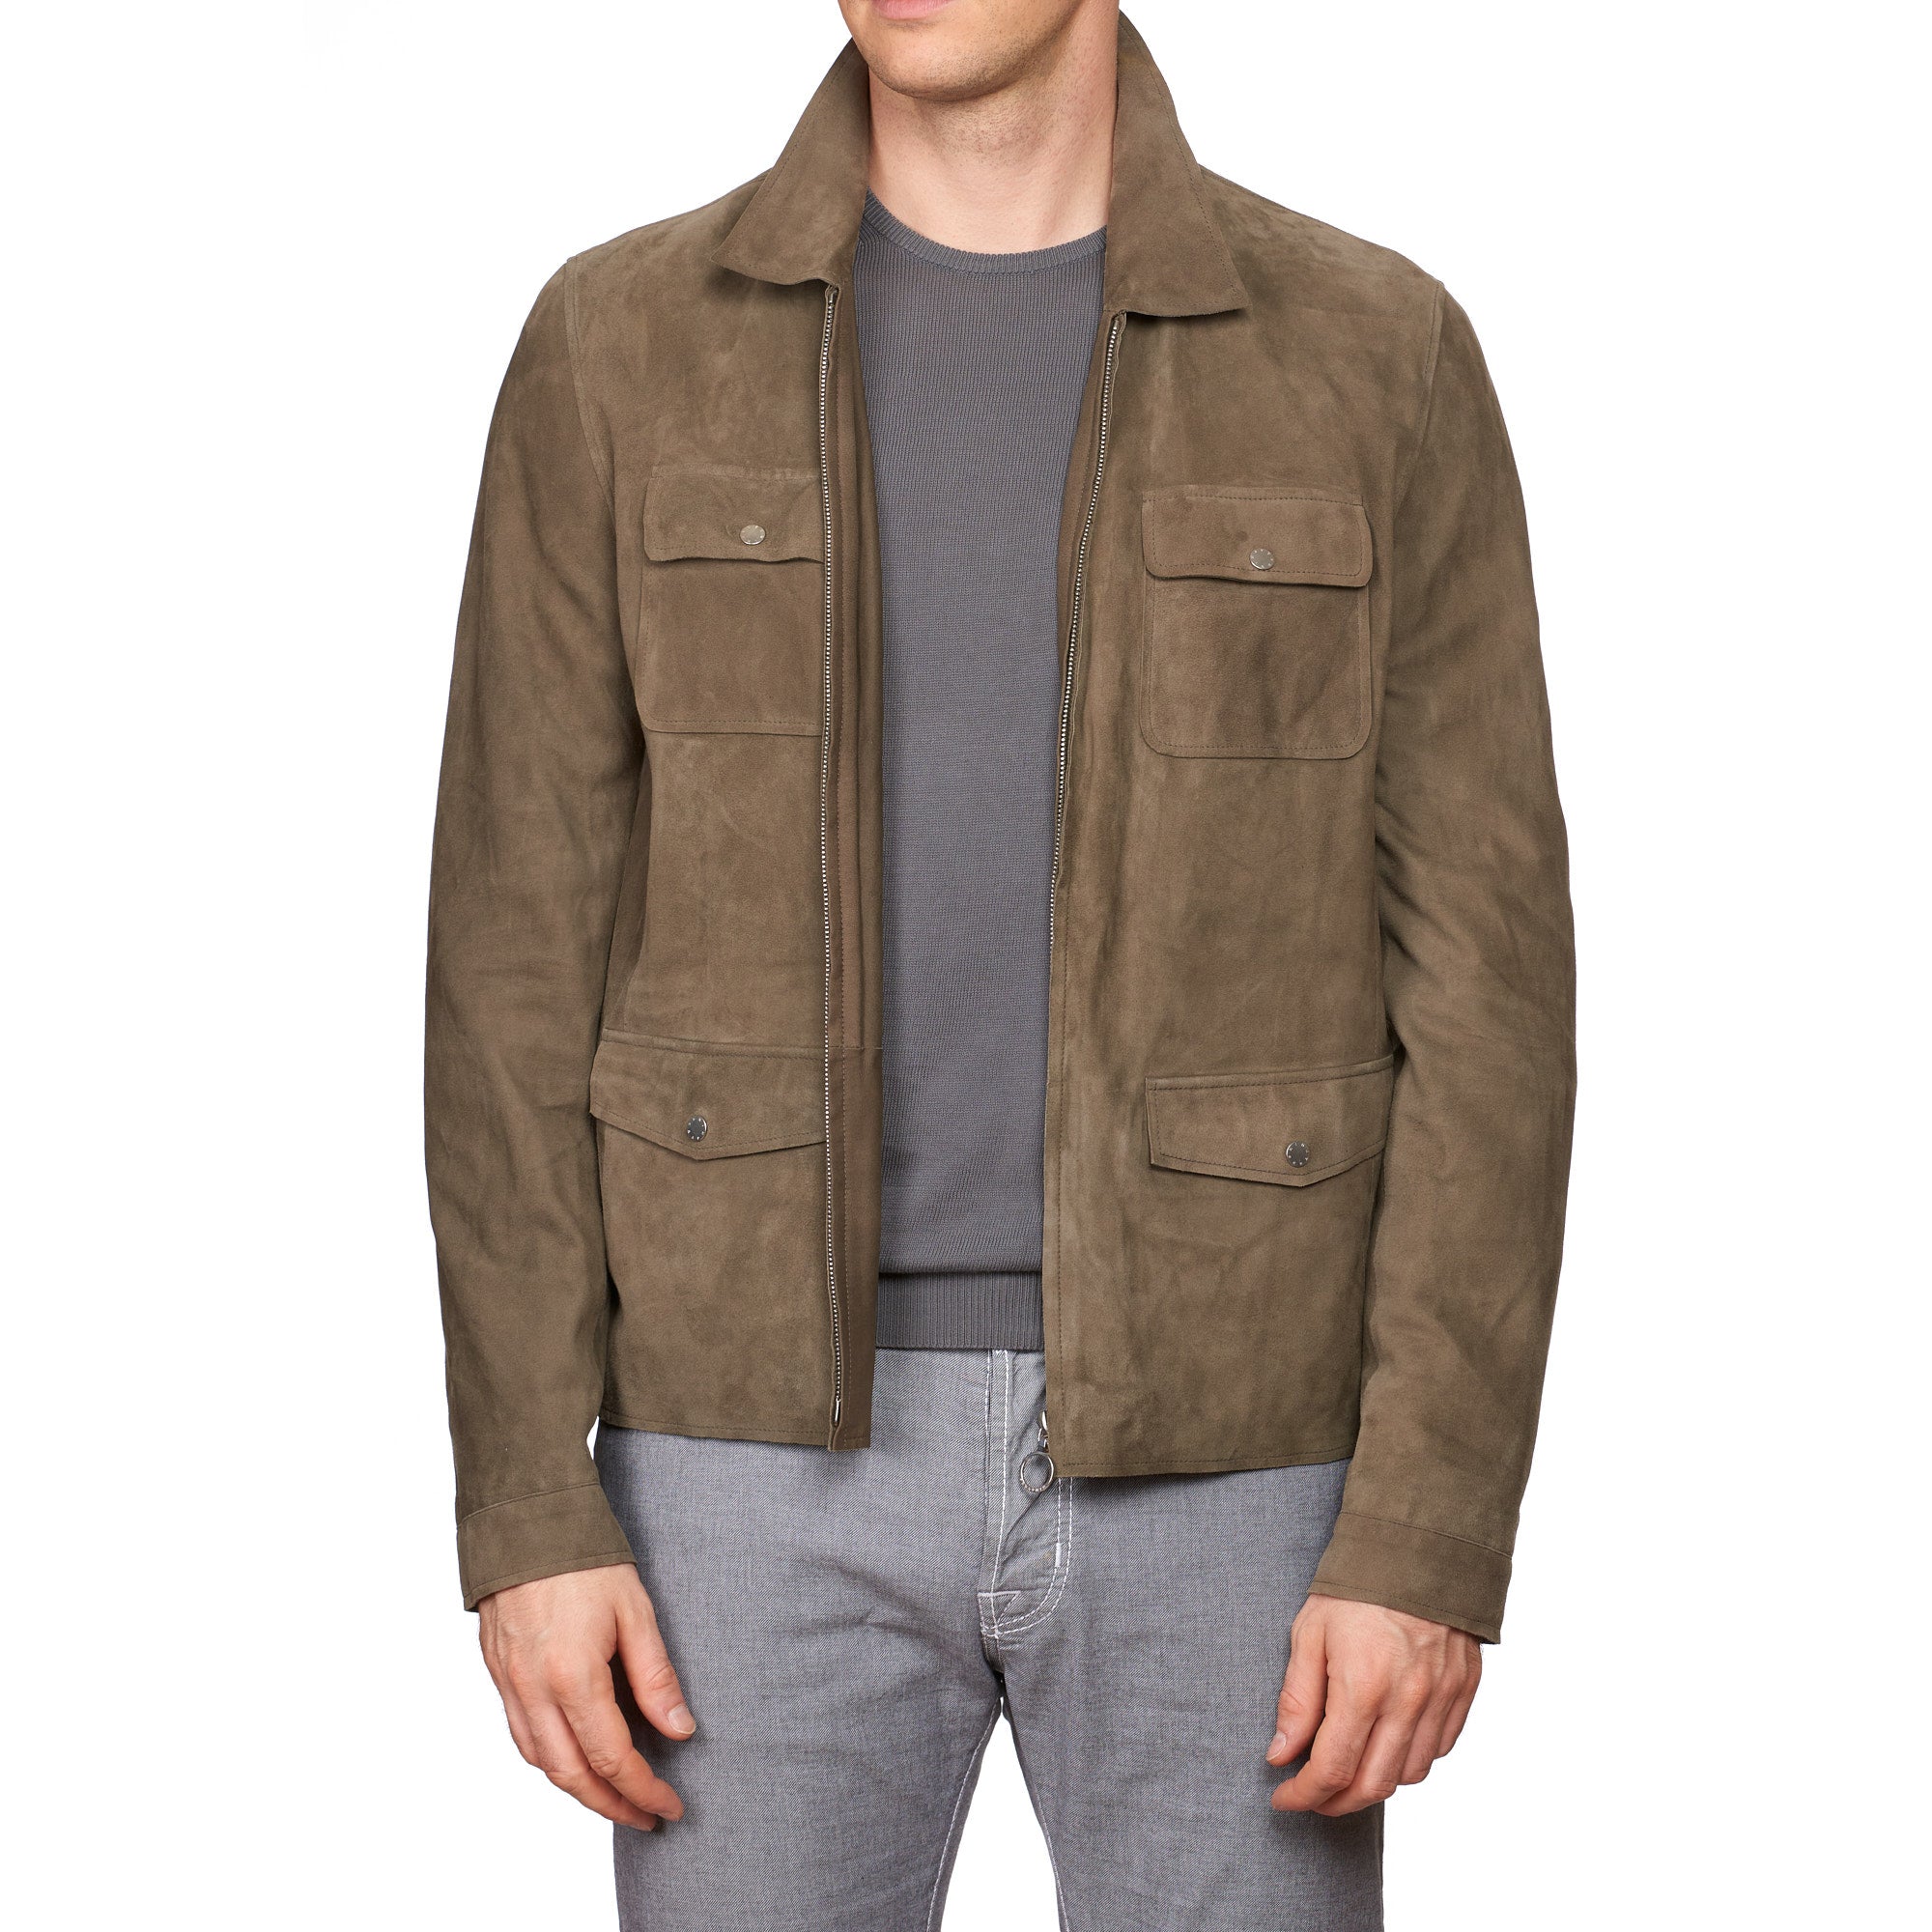 SERAPHIN Olive Suede Goat Leather Unlined Field Jacket FR 50 US M